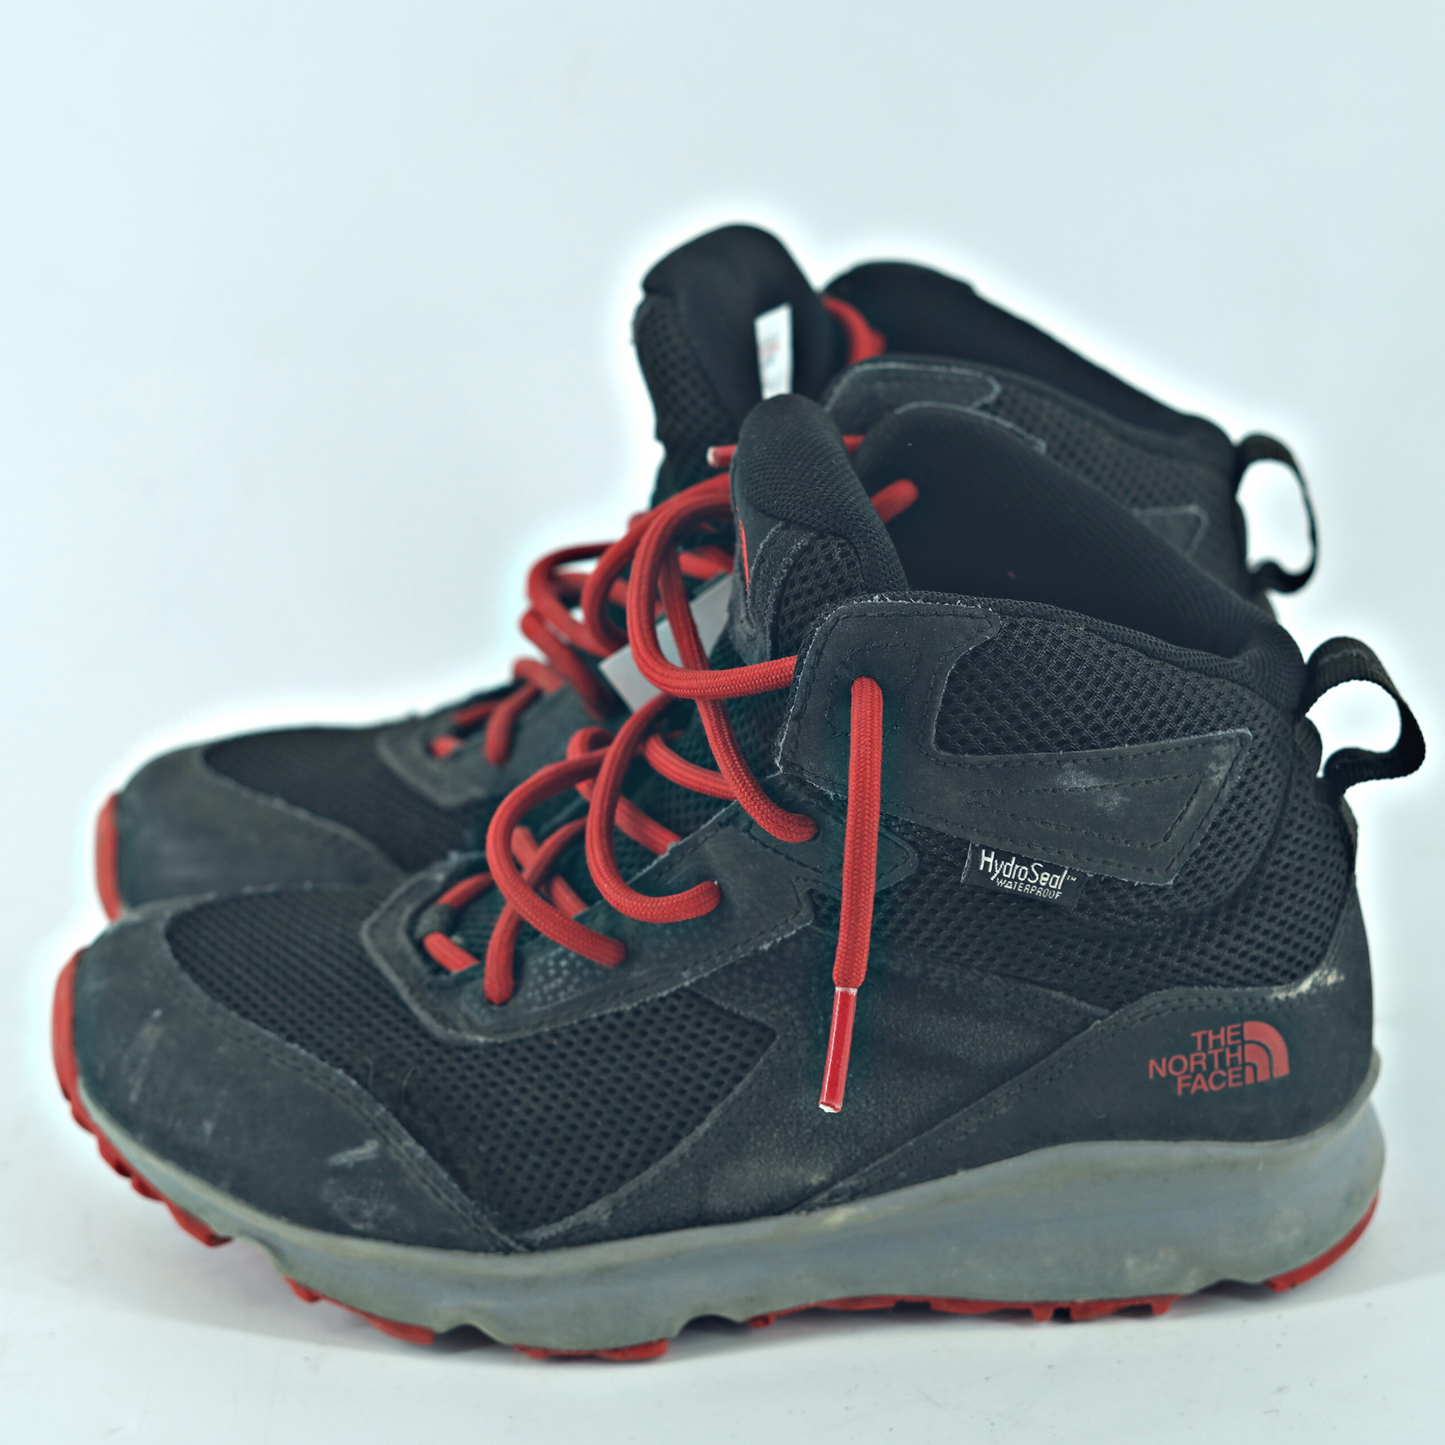 North Face Hiking Shoes